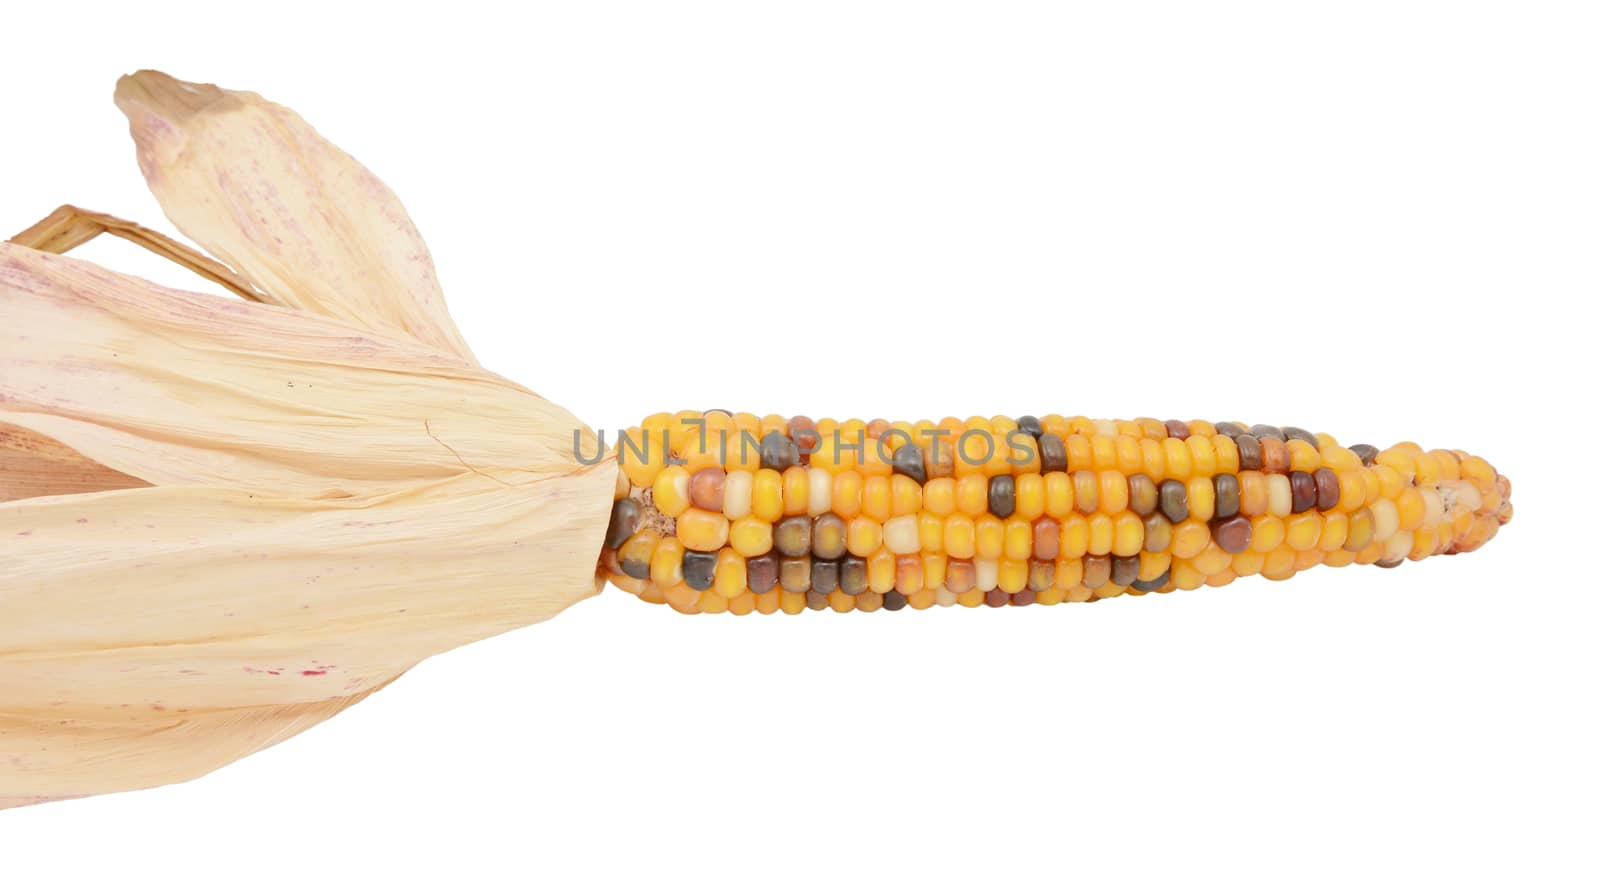 Ornamental flint corn with yellow, red and black niblets by sarahdoow